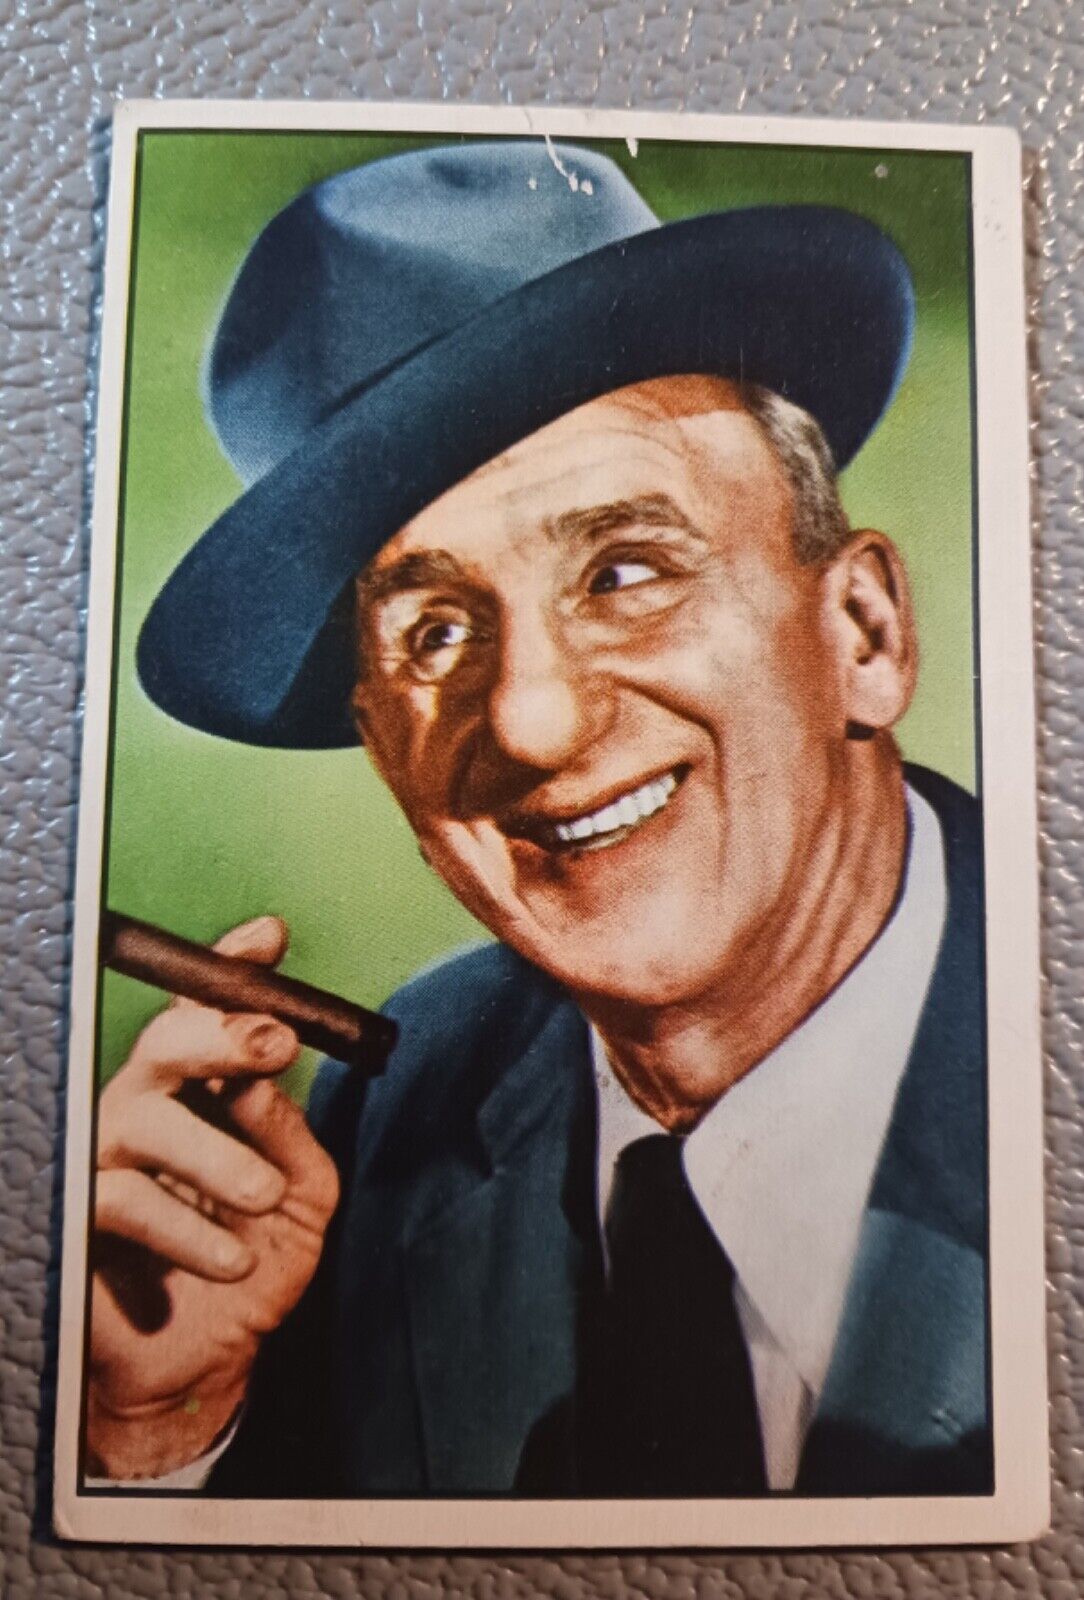 1952 Bowman #9 JIMMY DURANTE TV and Radio Stars of NBC (pencil back) Ship is $1